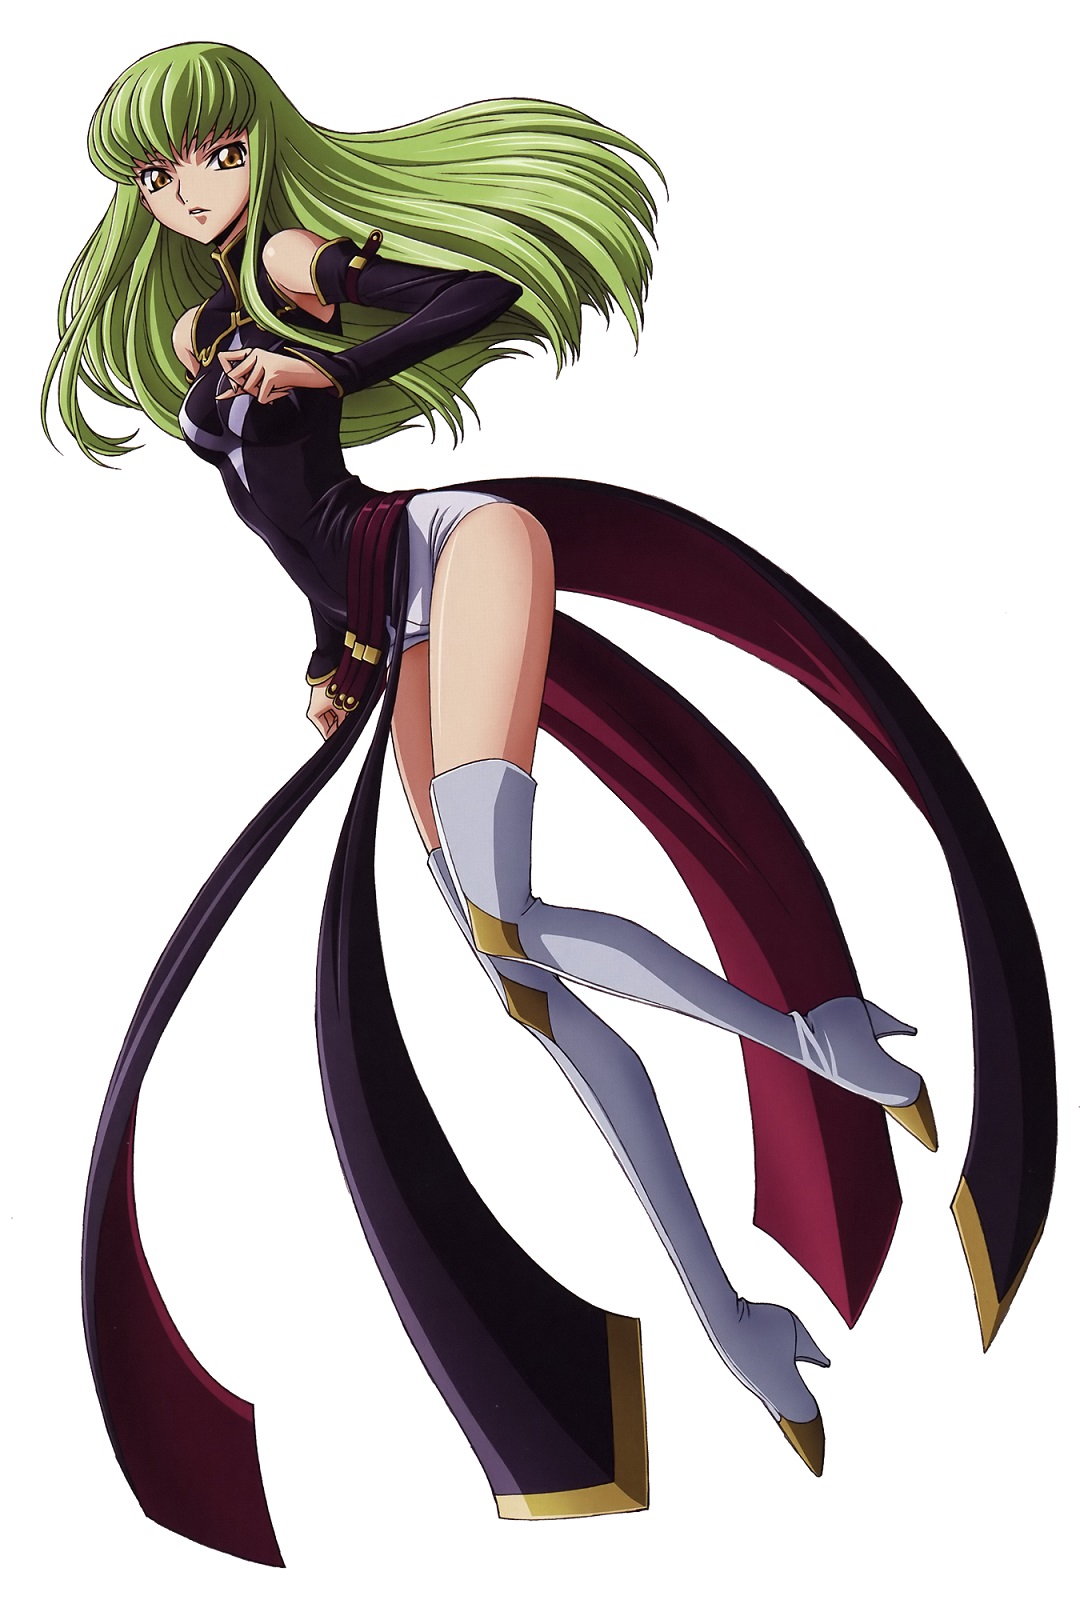 Featured image of post Cc Code Geass Outfits Since code geass plays this trope straight with most other characters however we can assume that their eyes are meant to imply both of their largely noble intentions and capacity for great good despite all the evil things they end up doing